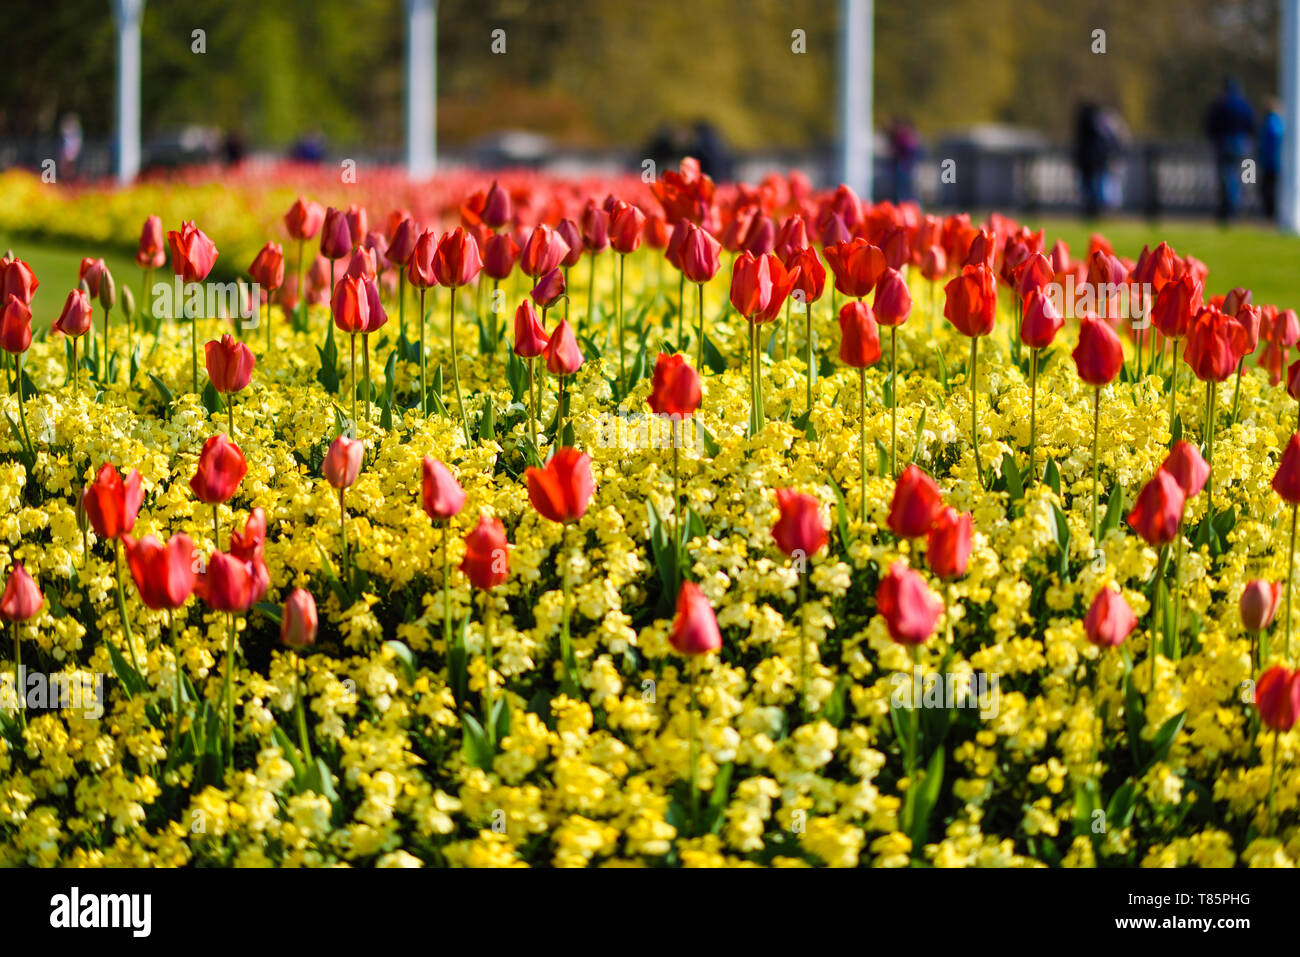 Red tulips near Buckingham Palace in London. Spring flowers. Stock Photo